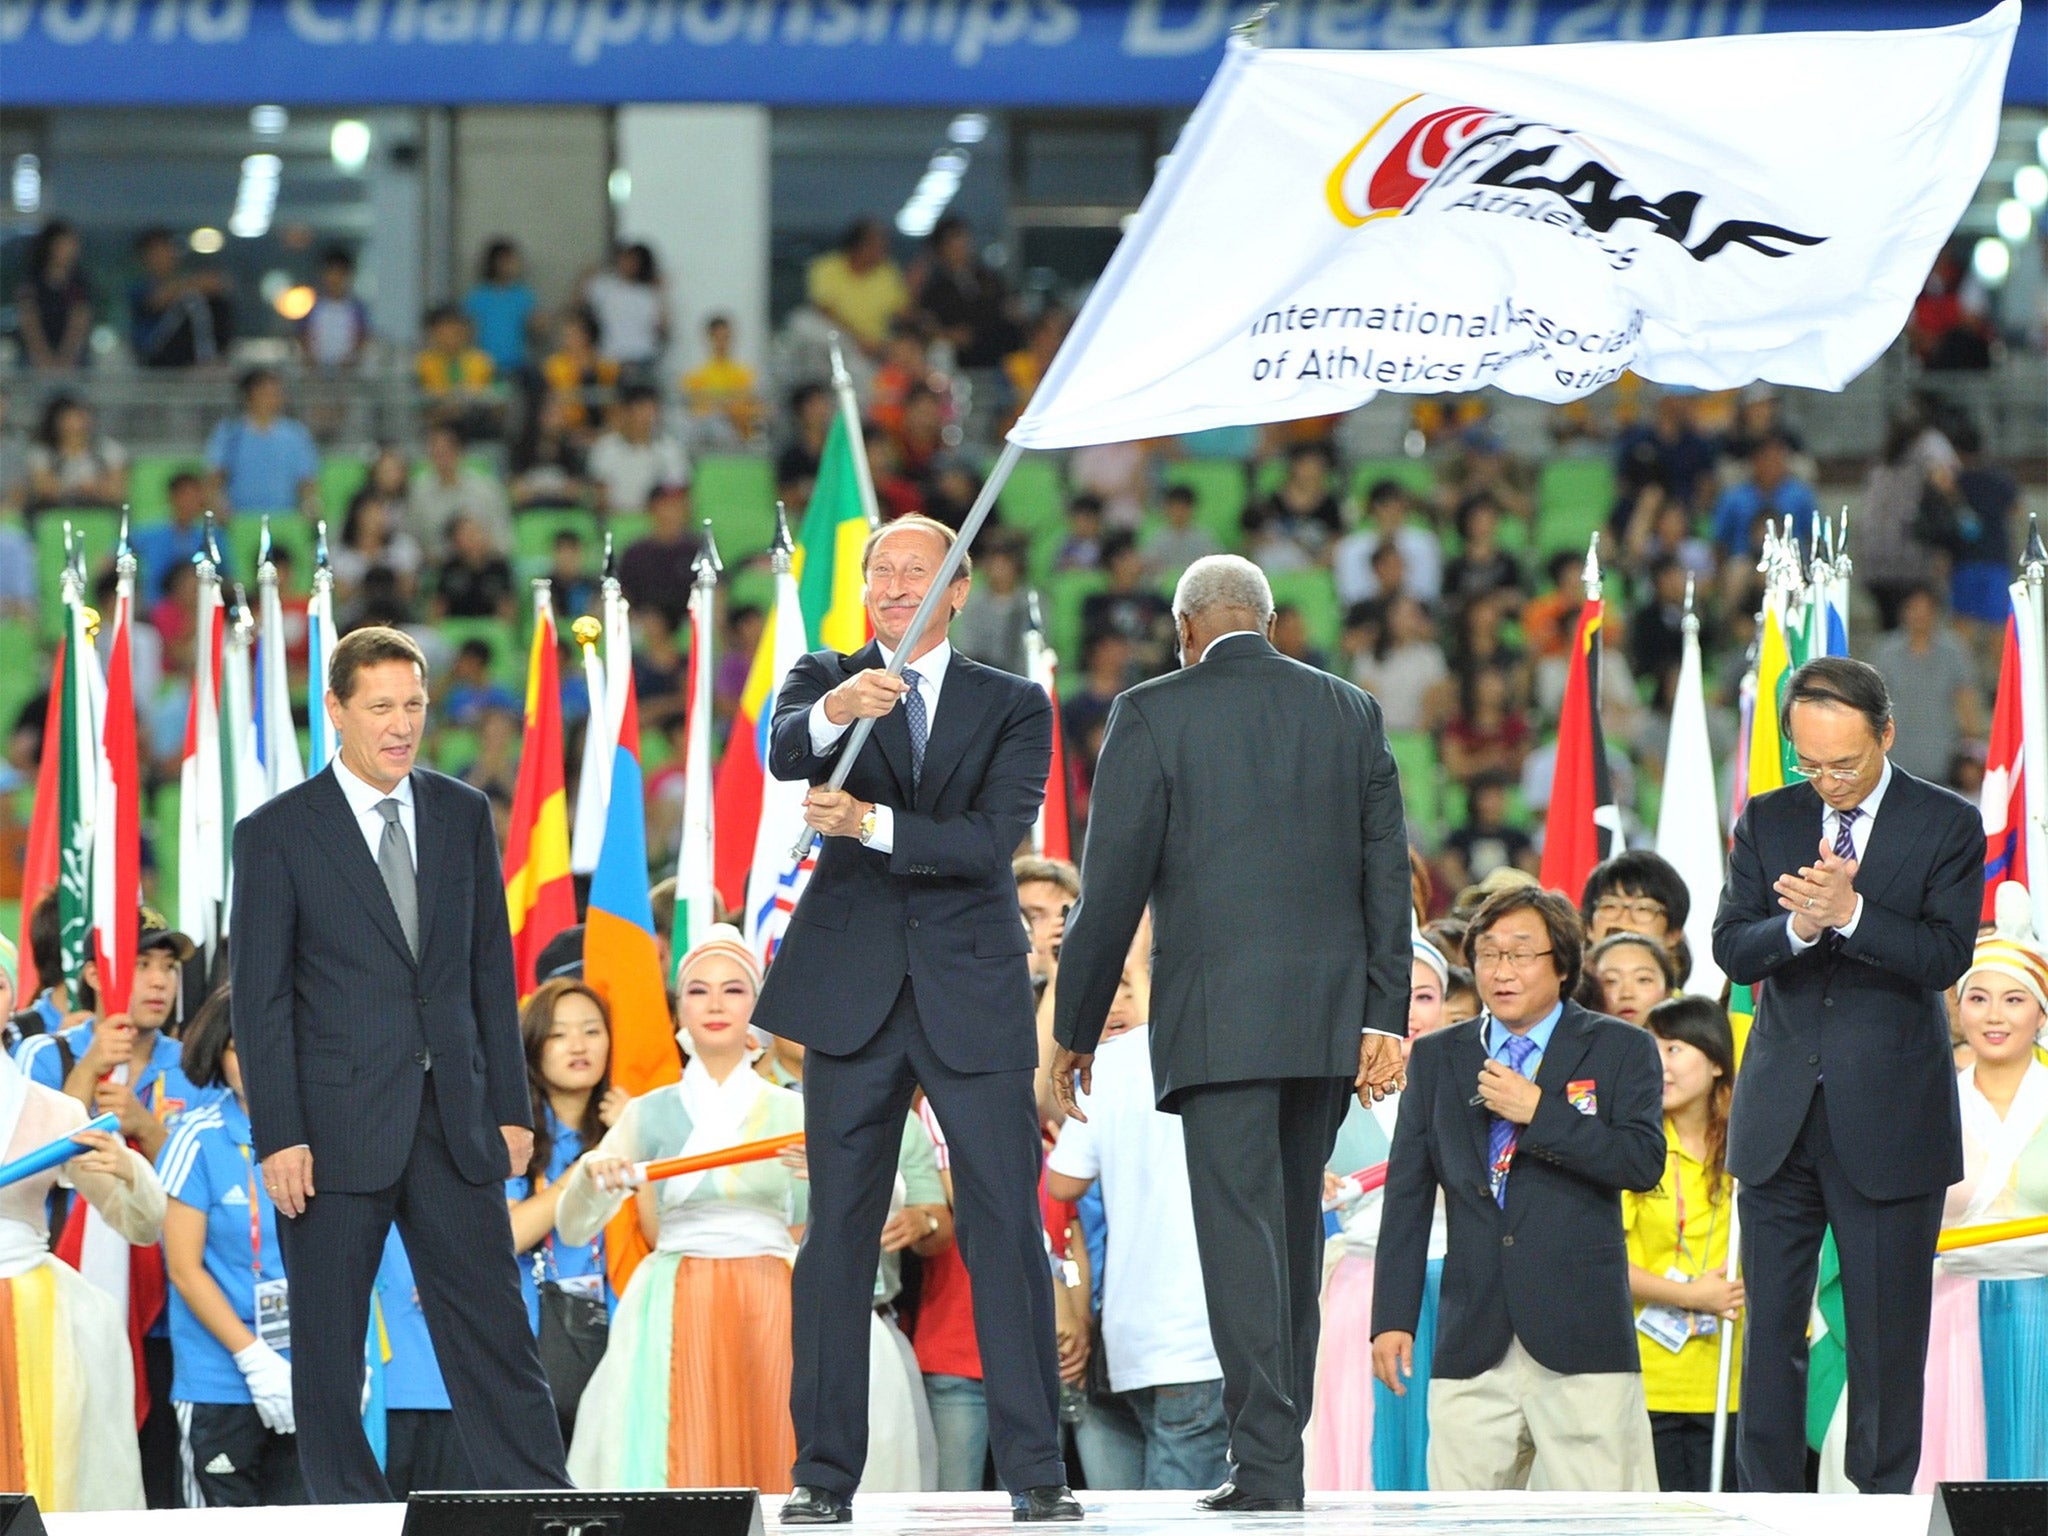 Valentin Balakhnichev, former head of the Russian Athletics Federation, waves the IAAF flag at the 2011 World Championships in Daegu